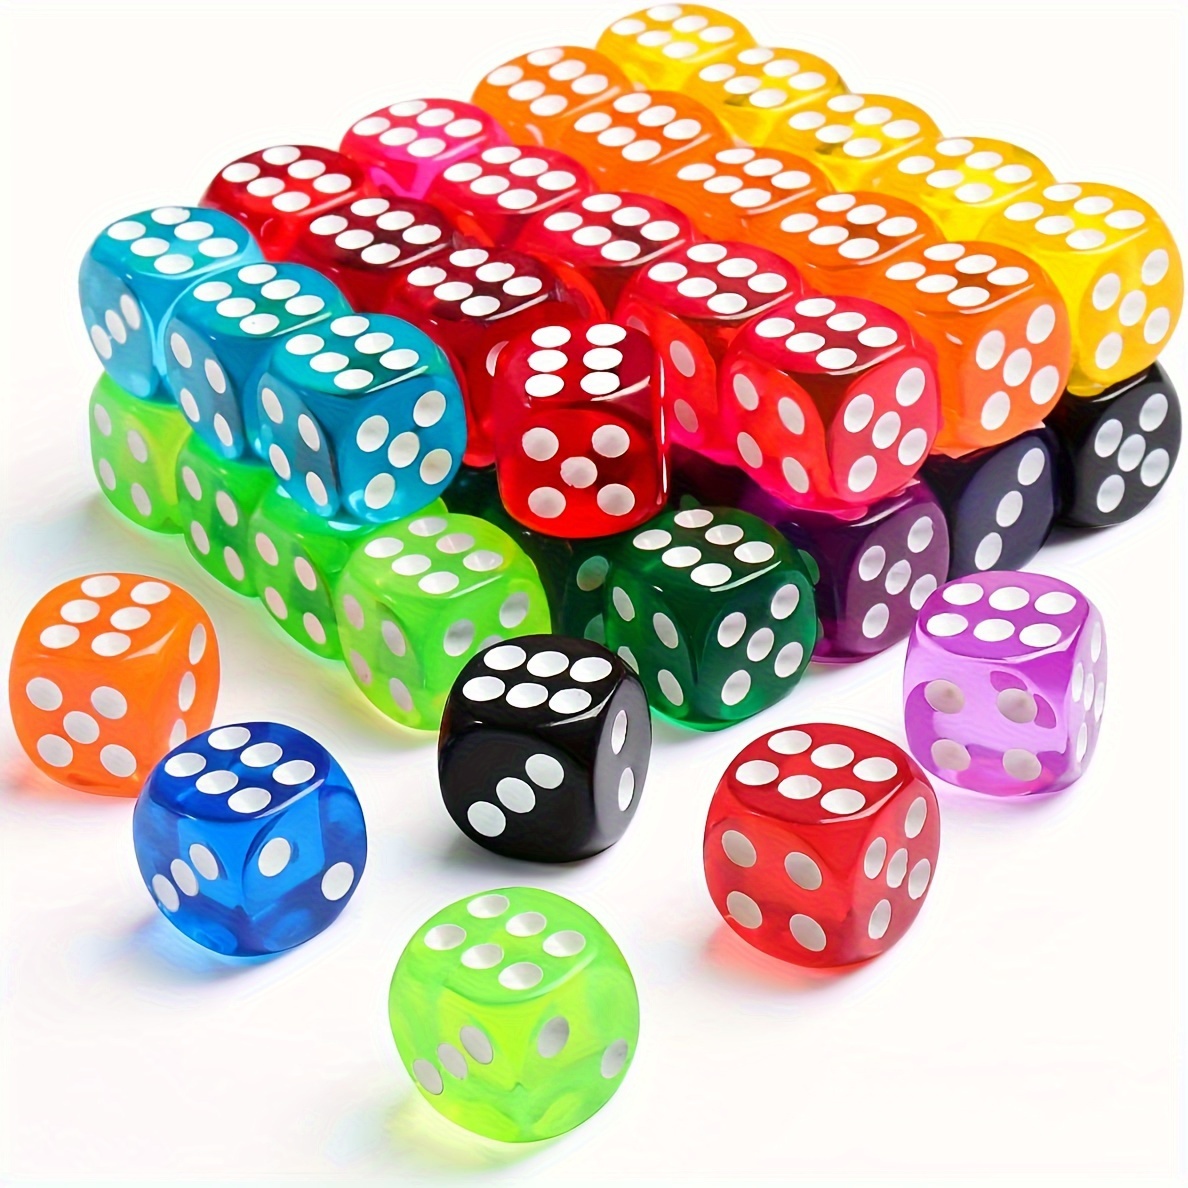 

50pcs Colorful 6-sided Dices For Board Games, 16mm Bulk Dices For Math Learning